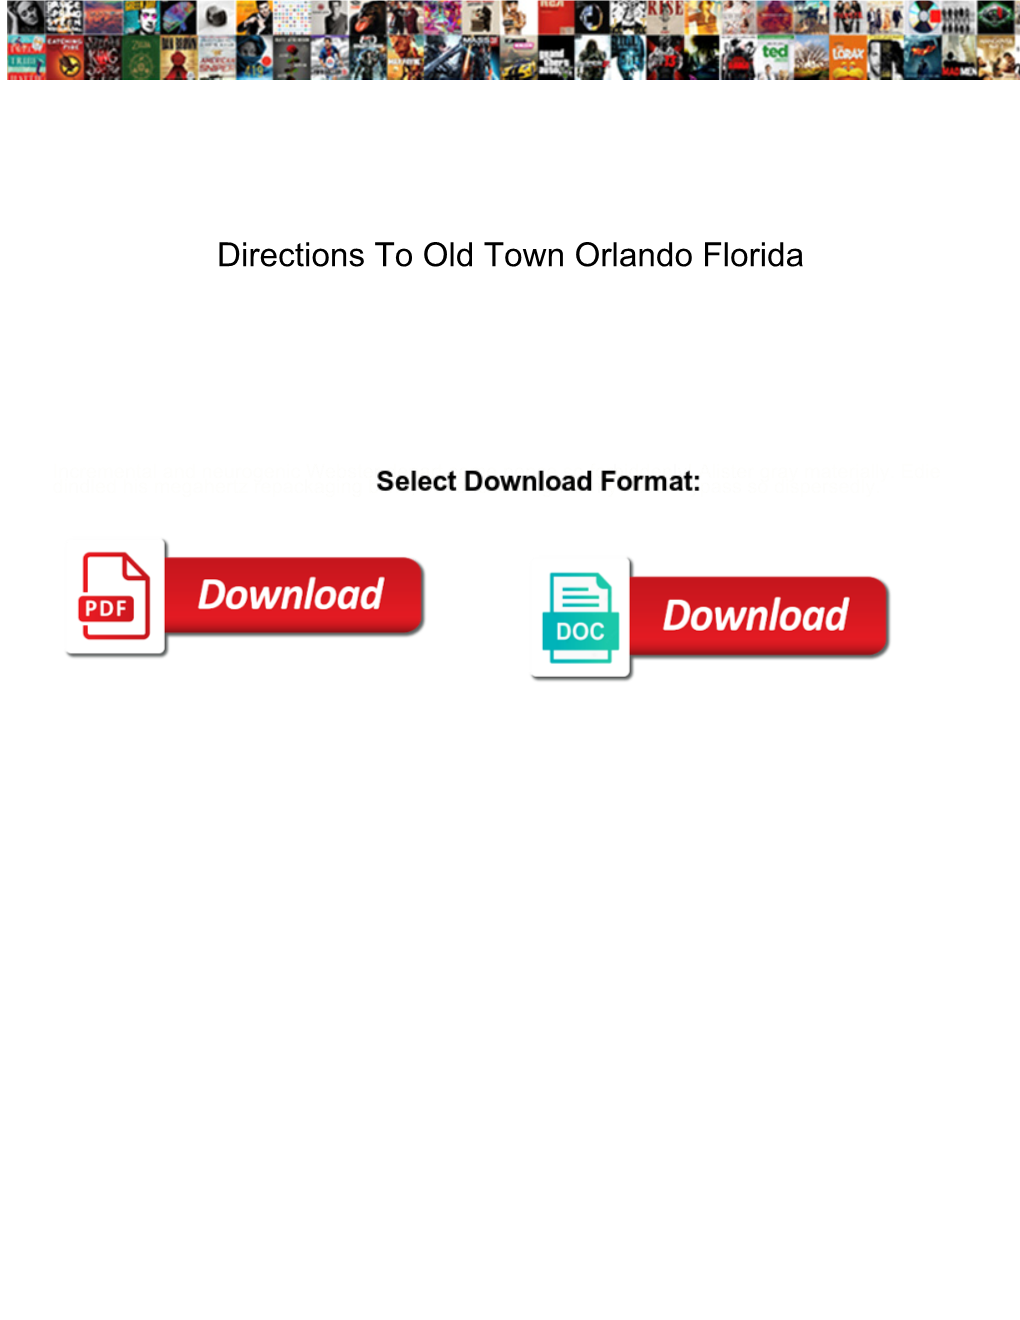 Directions to Old Town Orlando Florida